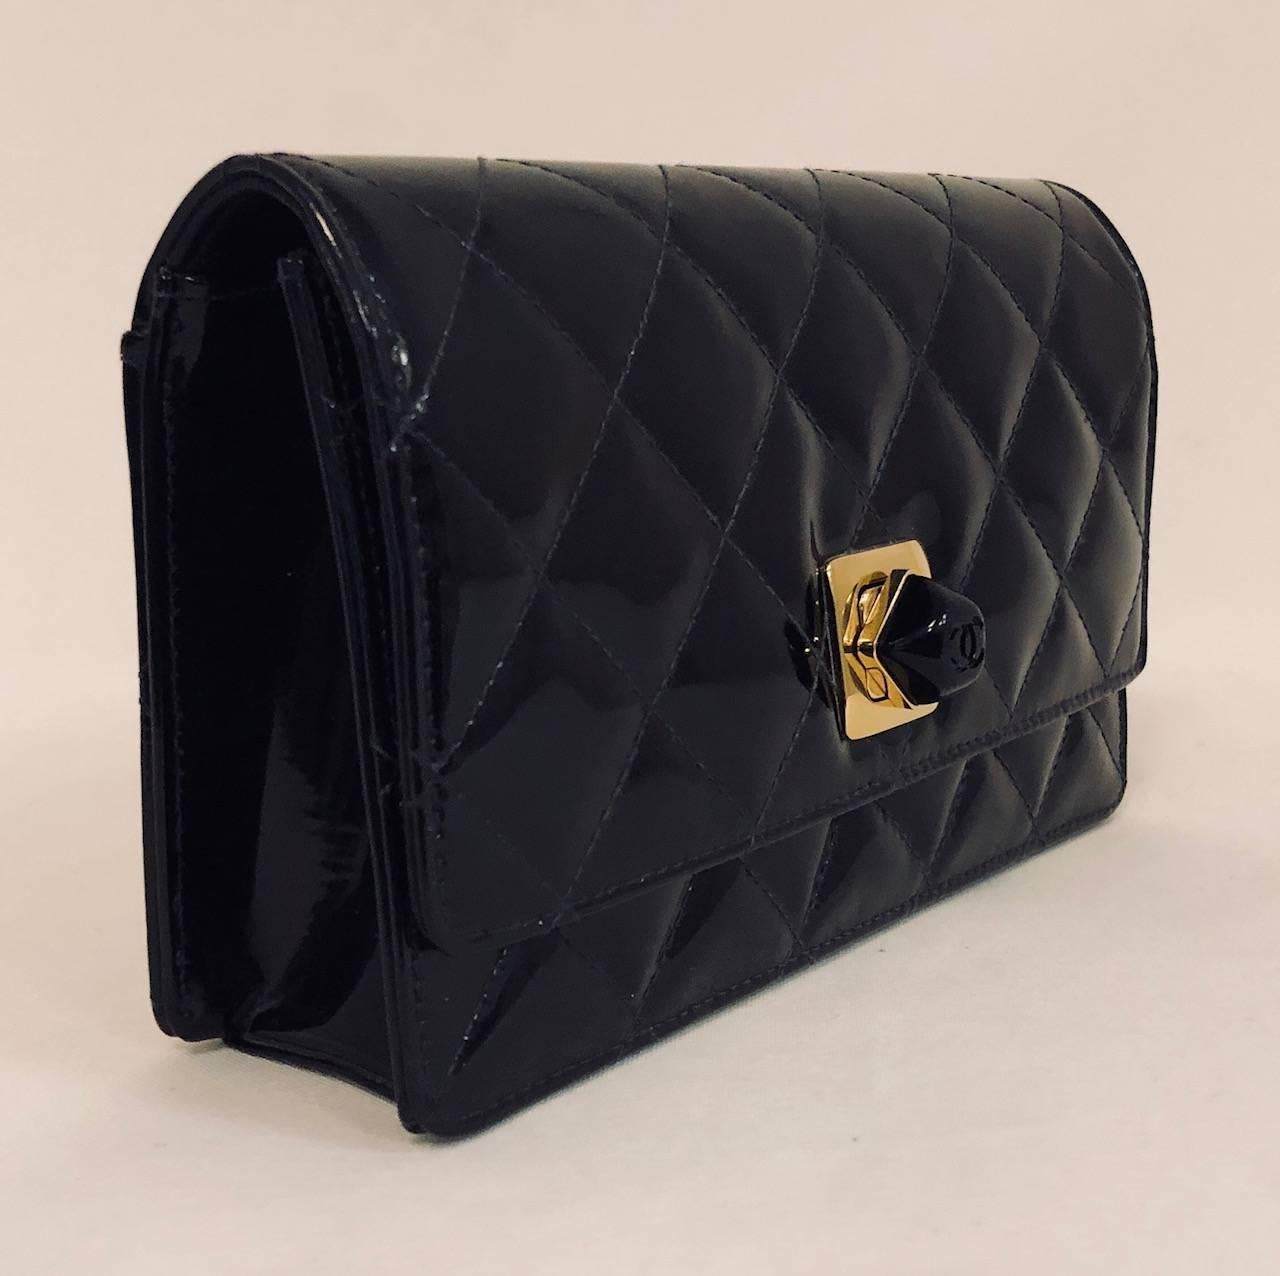 Classic Chanel Clutch is actually large enough for today's larger smartphones!  Crafted in the late 1990s, this series 5 bag features black patent diamond quilted leather, rear open slit pocket and smooth bottom and sides.  Resin signature logo